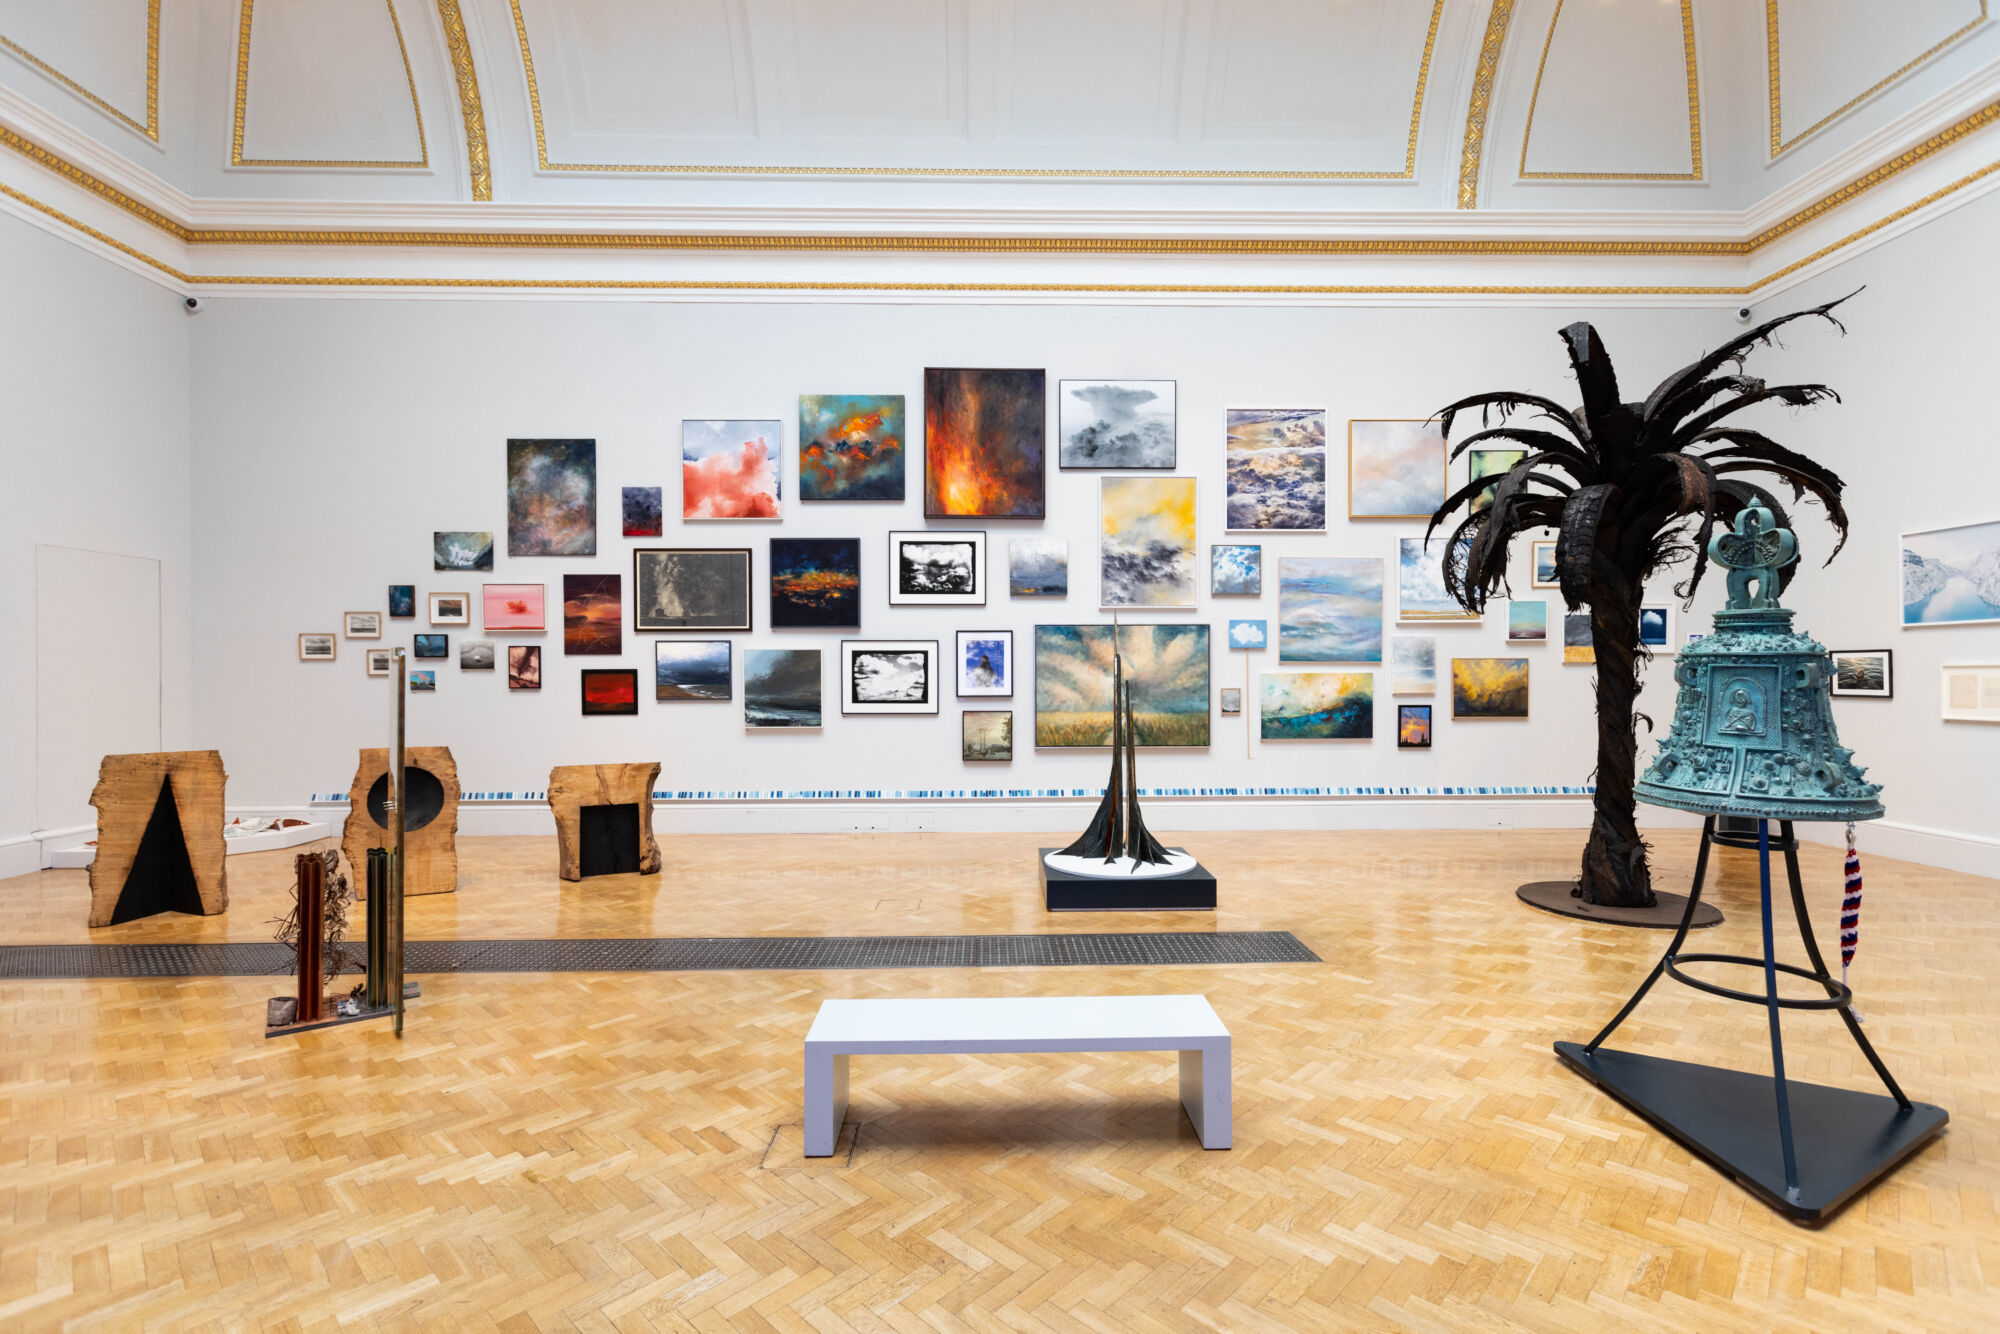 The Wick - Gallery view Summer Exhibition 2022
Photo: © David Parry/ Royal Academy of Arts